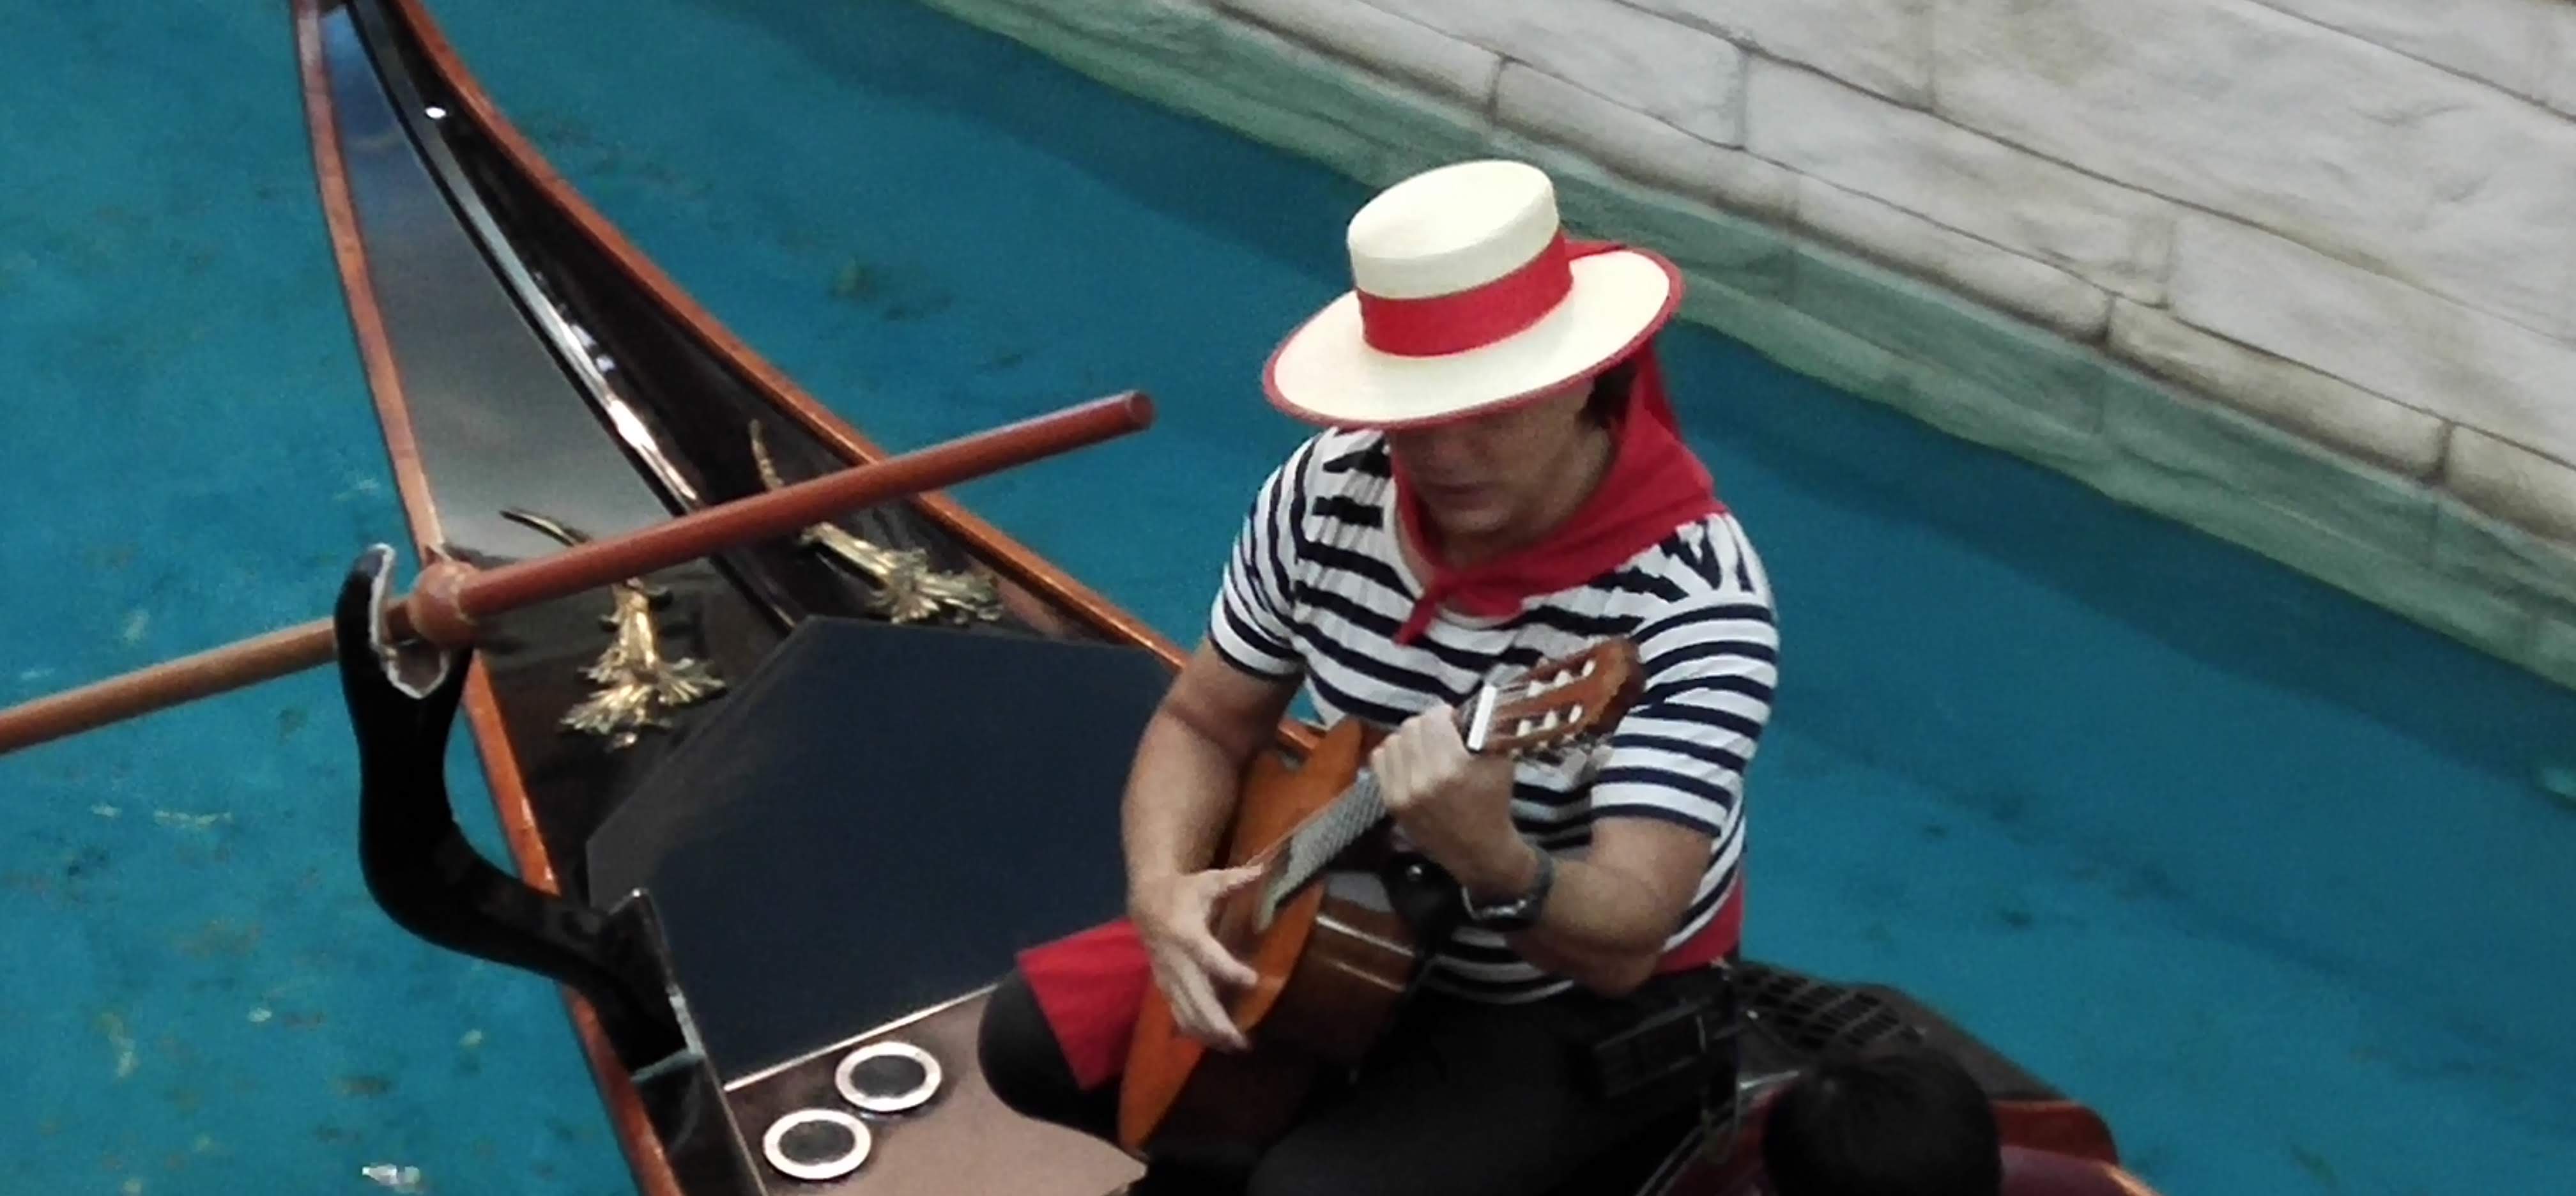 The Gondolier is singing.